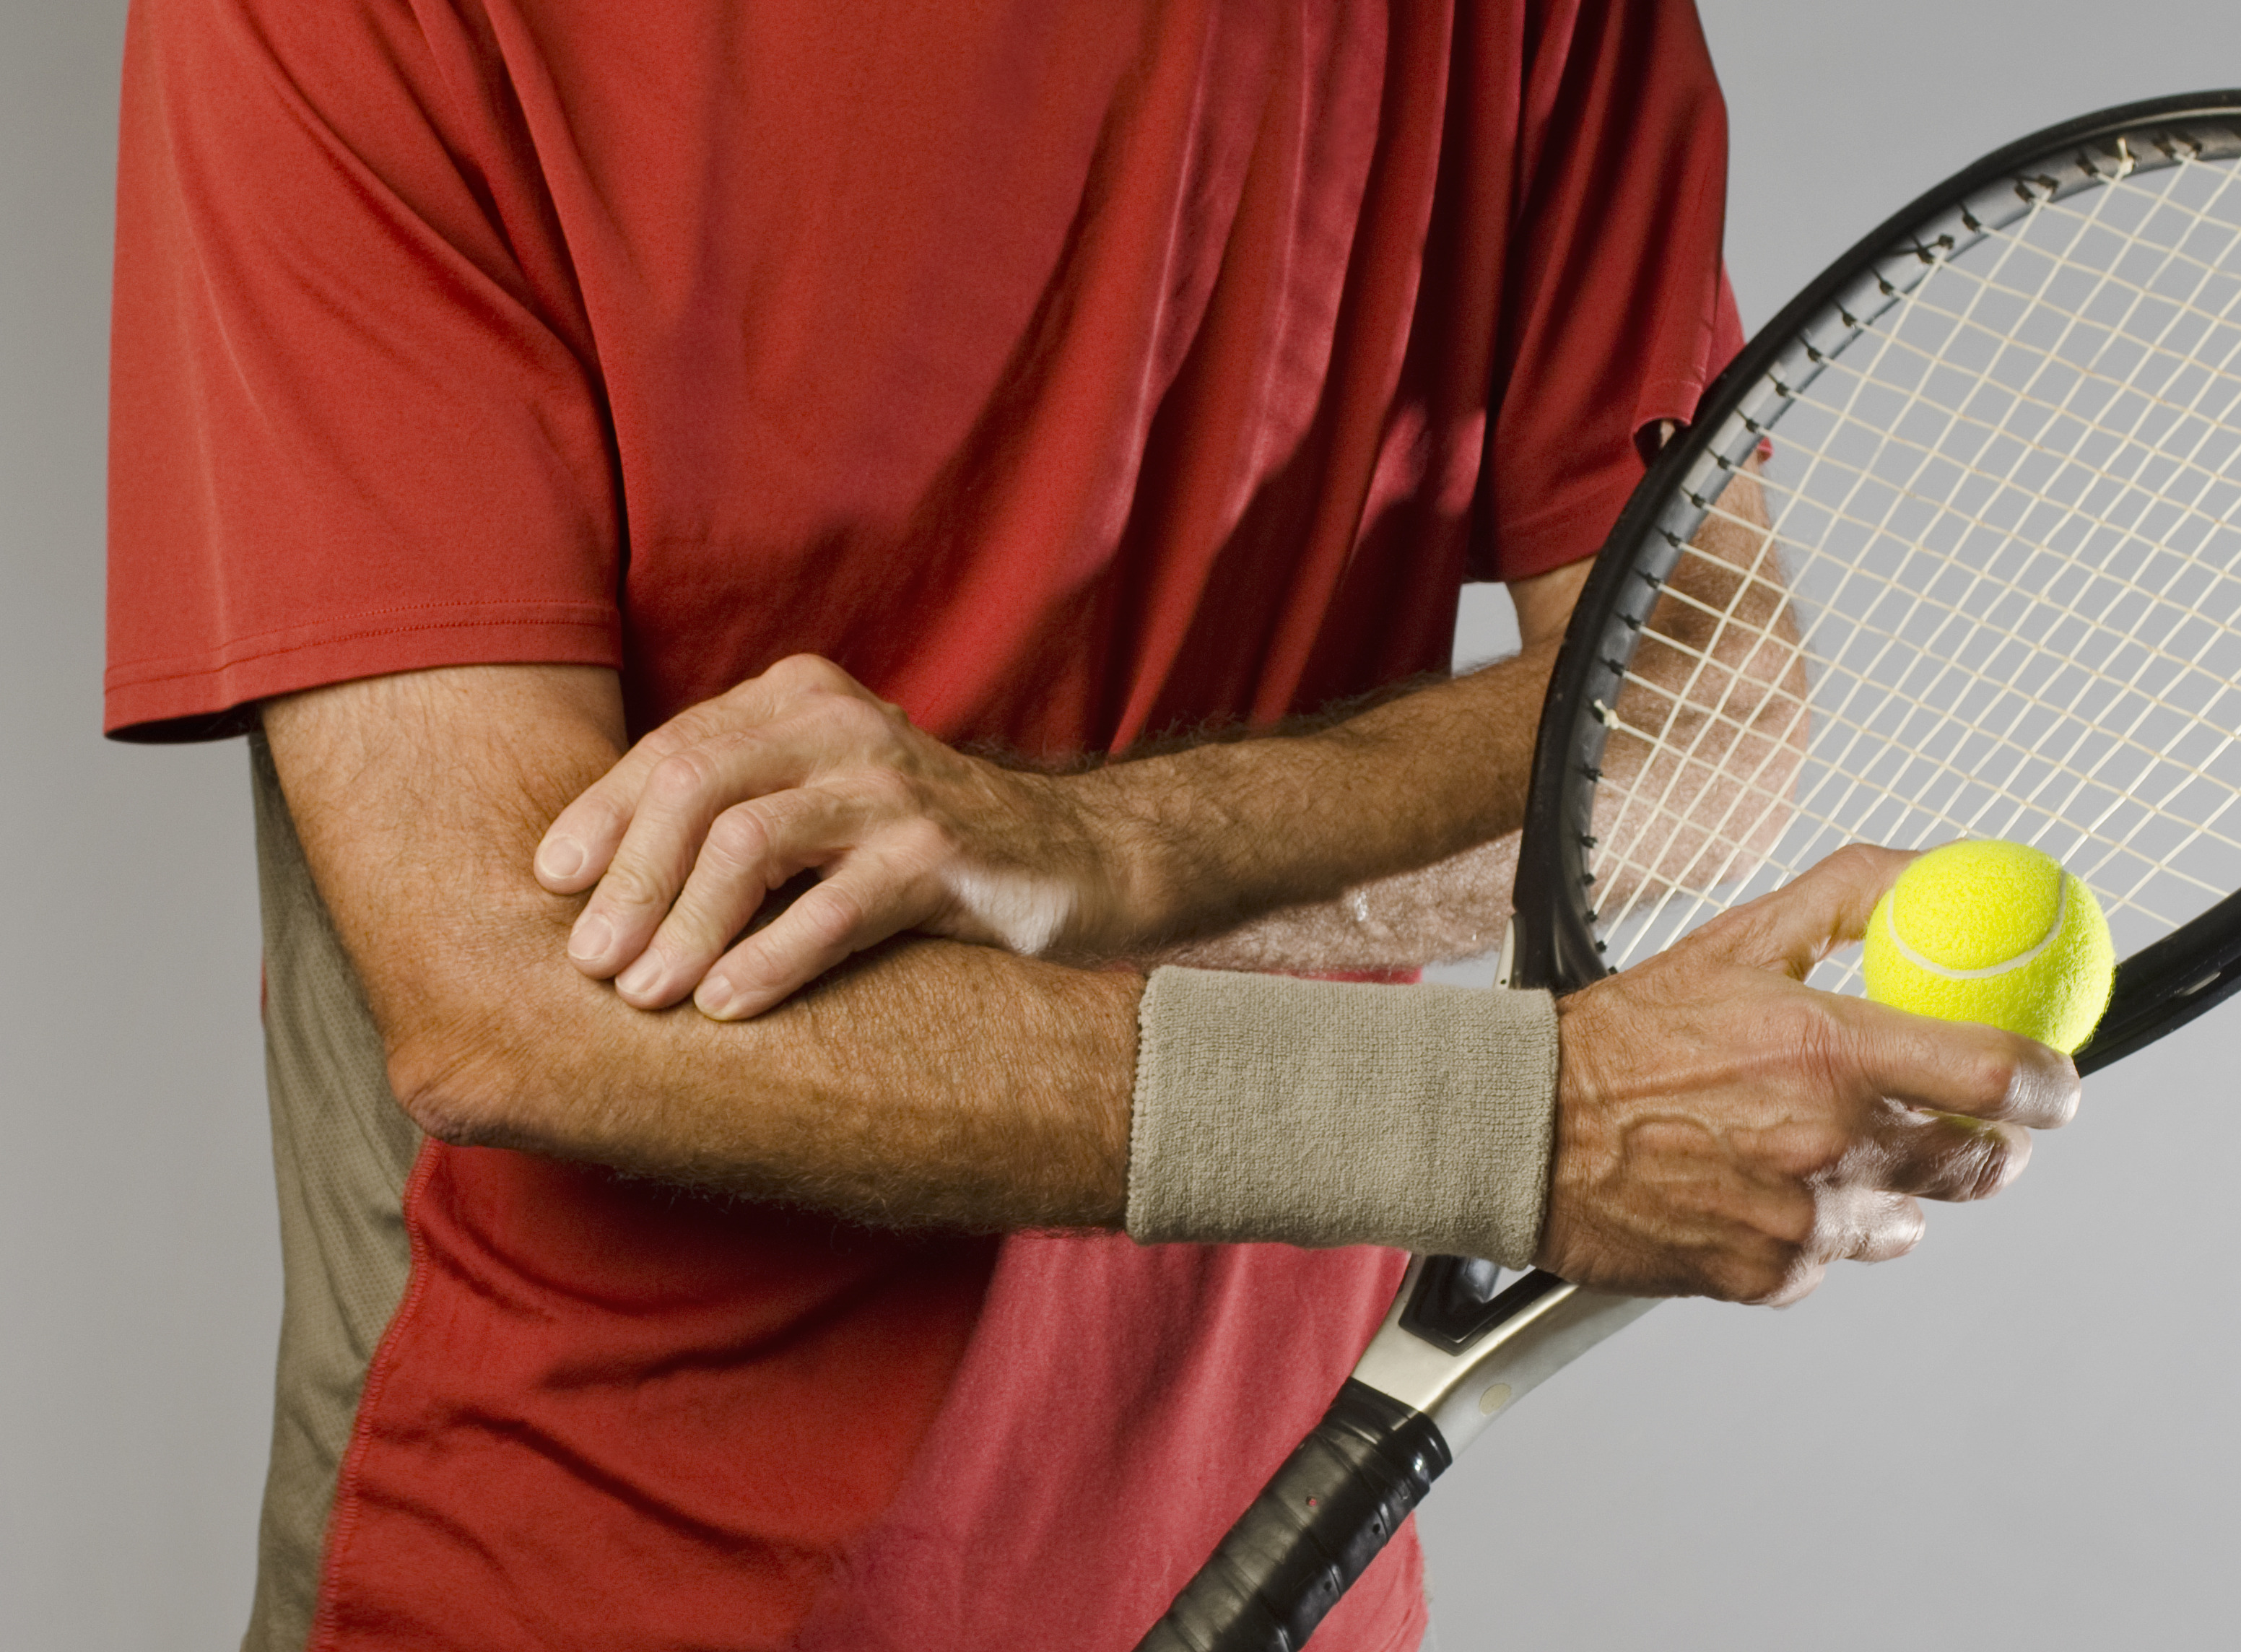 Commin Sports Injuries: Tennis Elbow